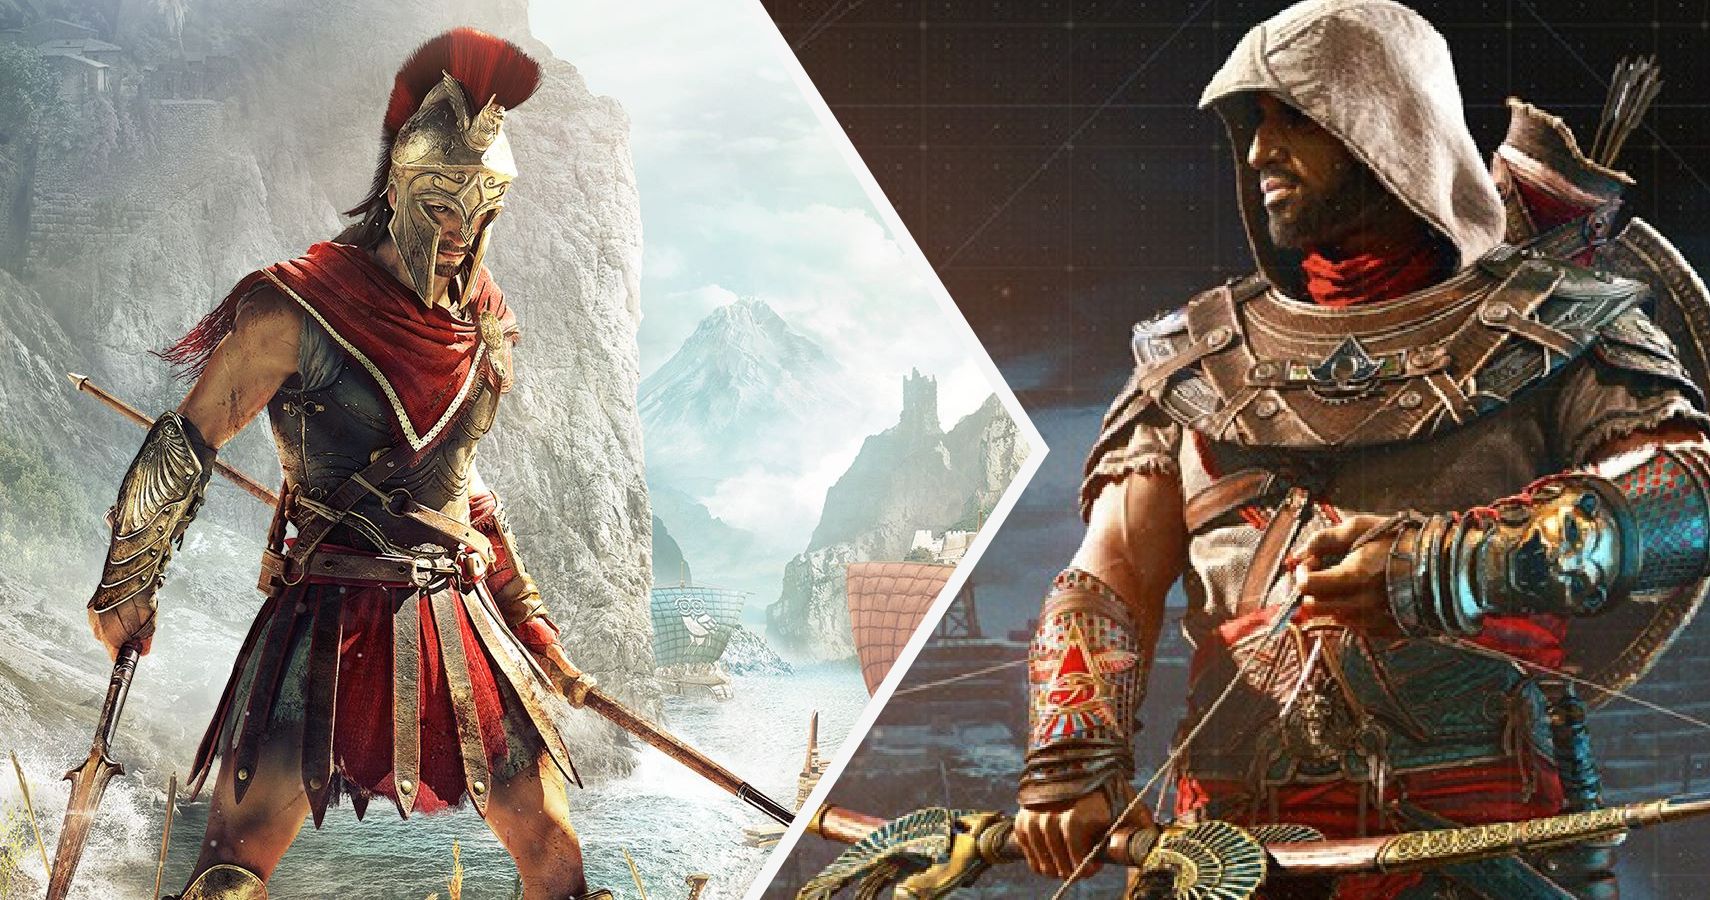 Things That Happened Between Assassins Creed Odyssey And Origins